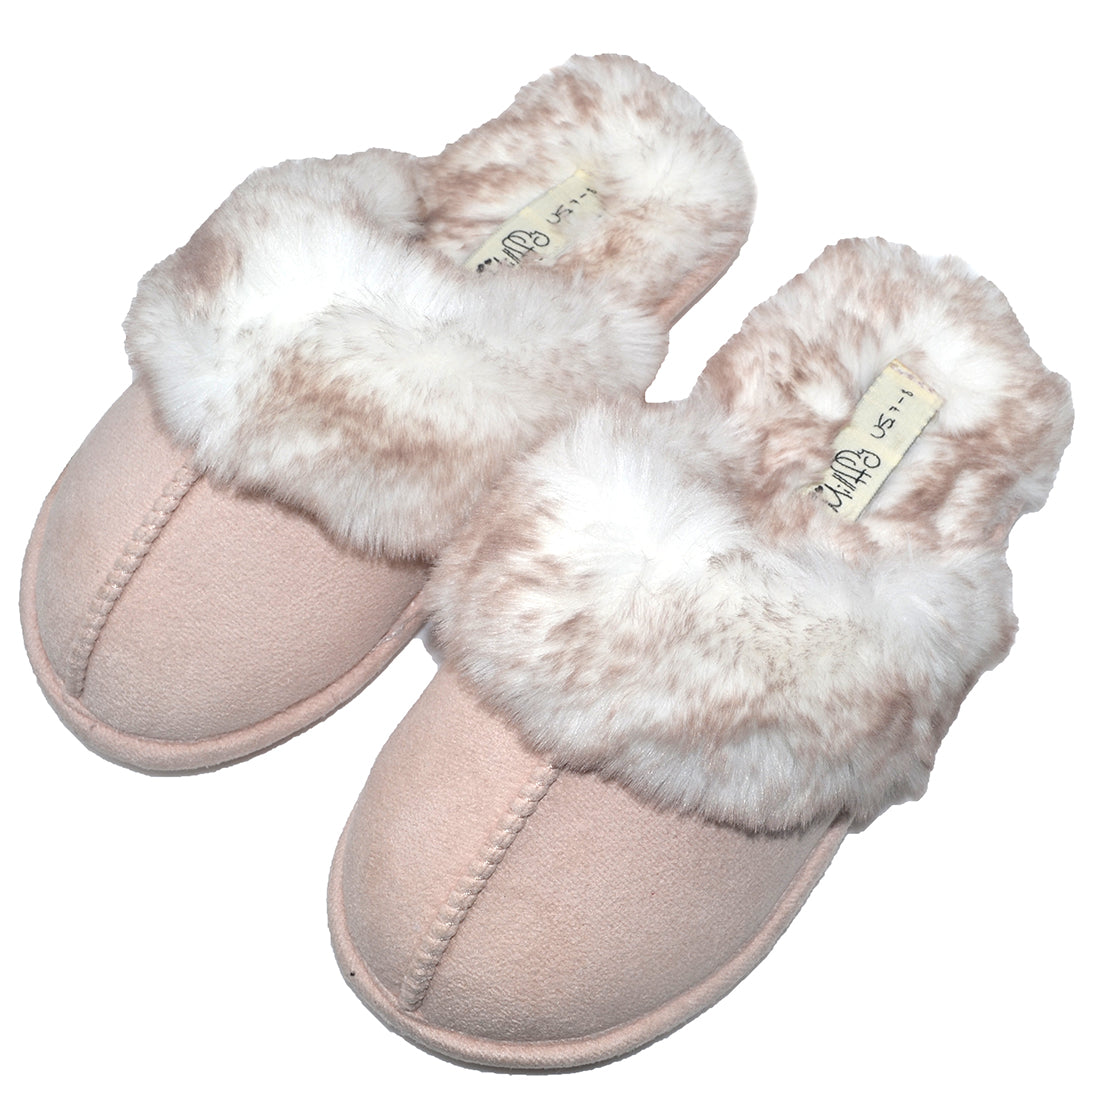 Millffy wide womens slippers women fur lined clogs scuff slippers for women slippers unisex